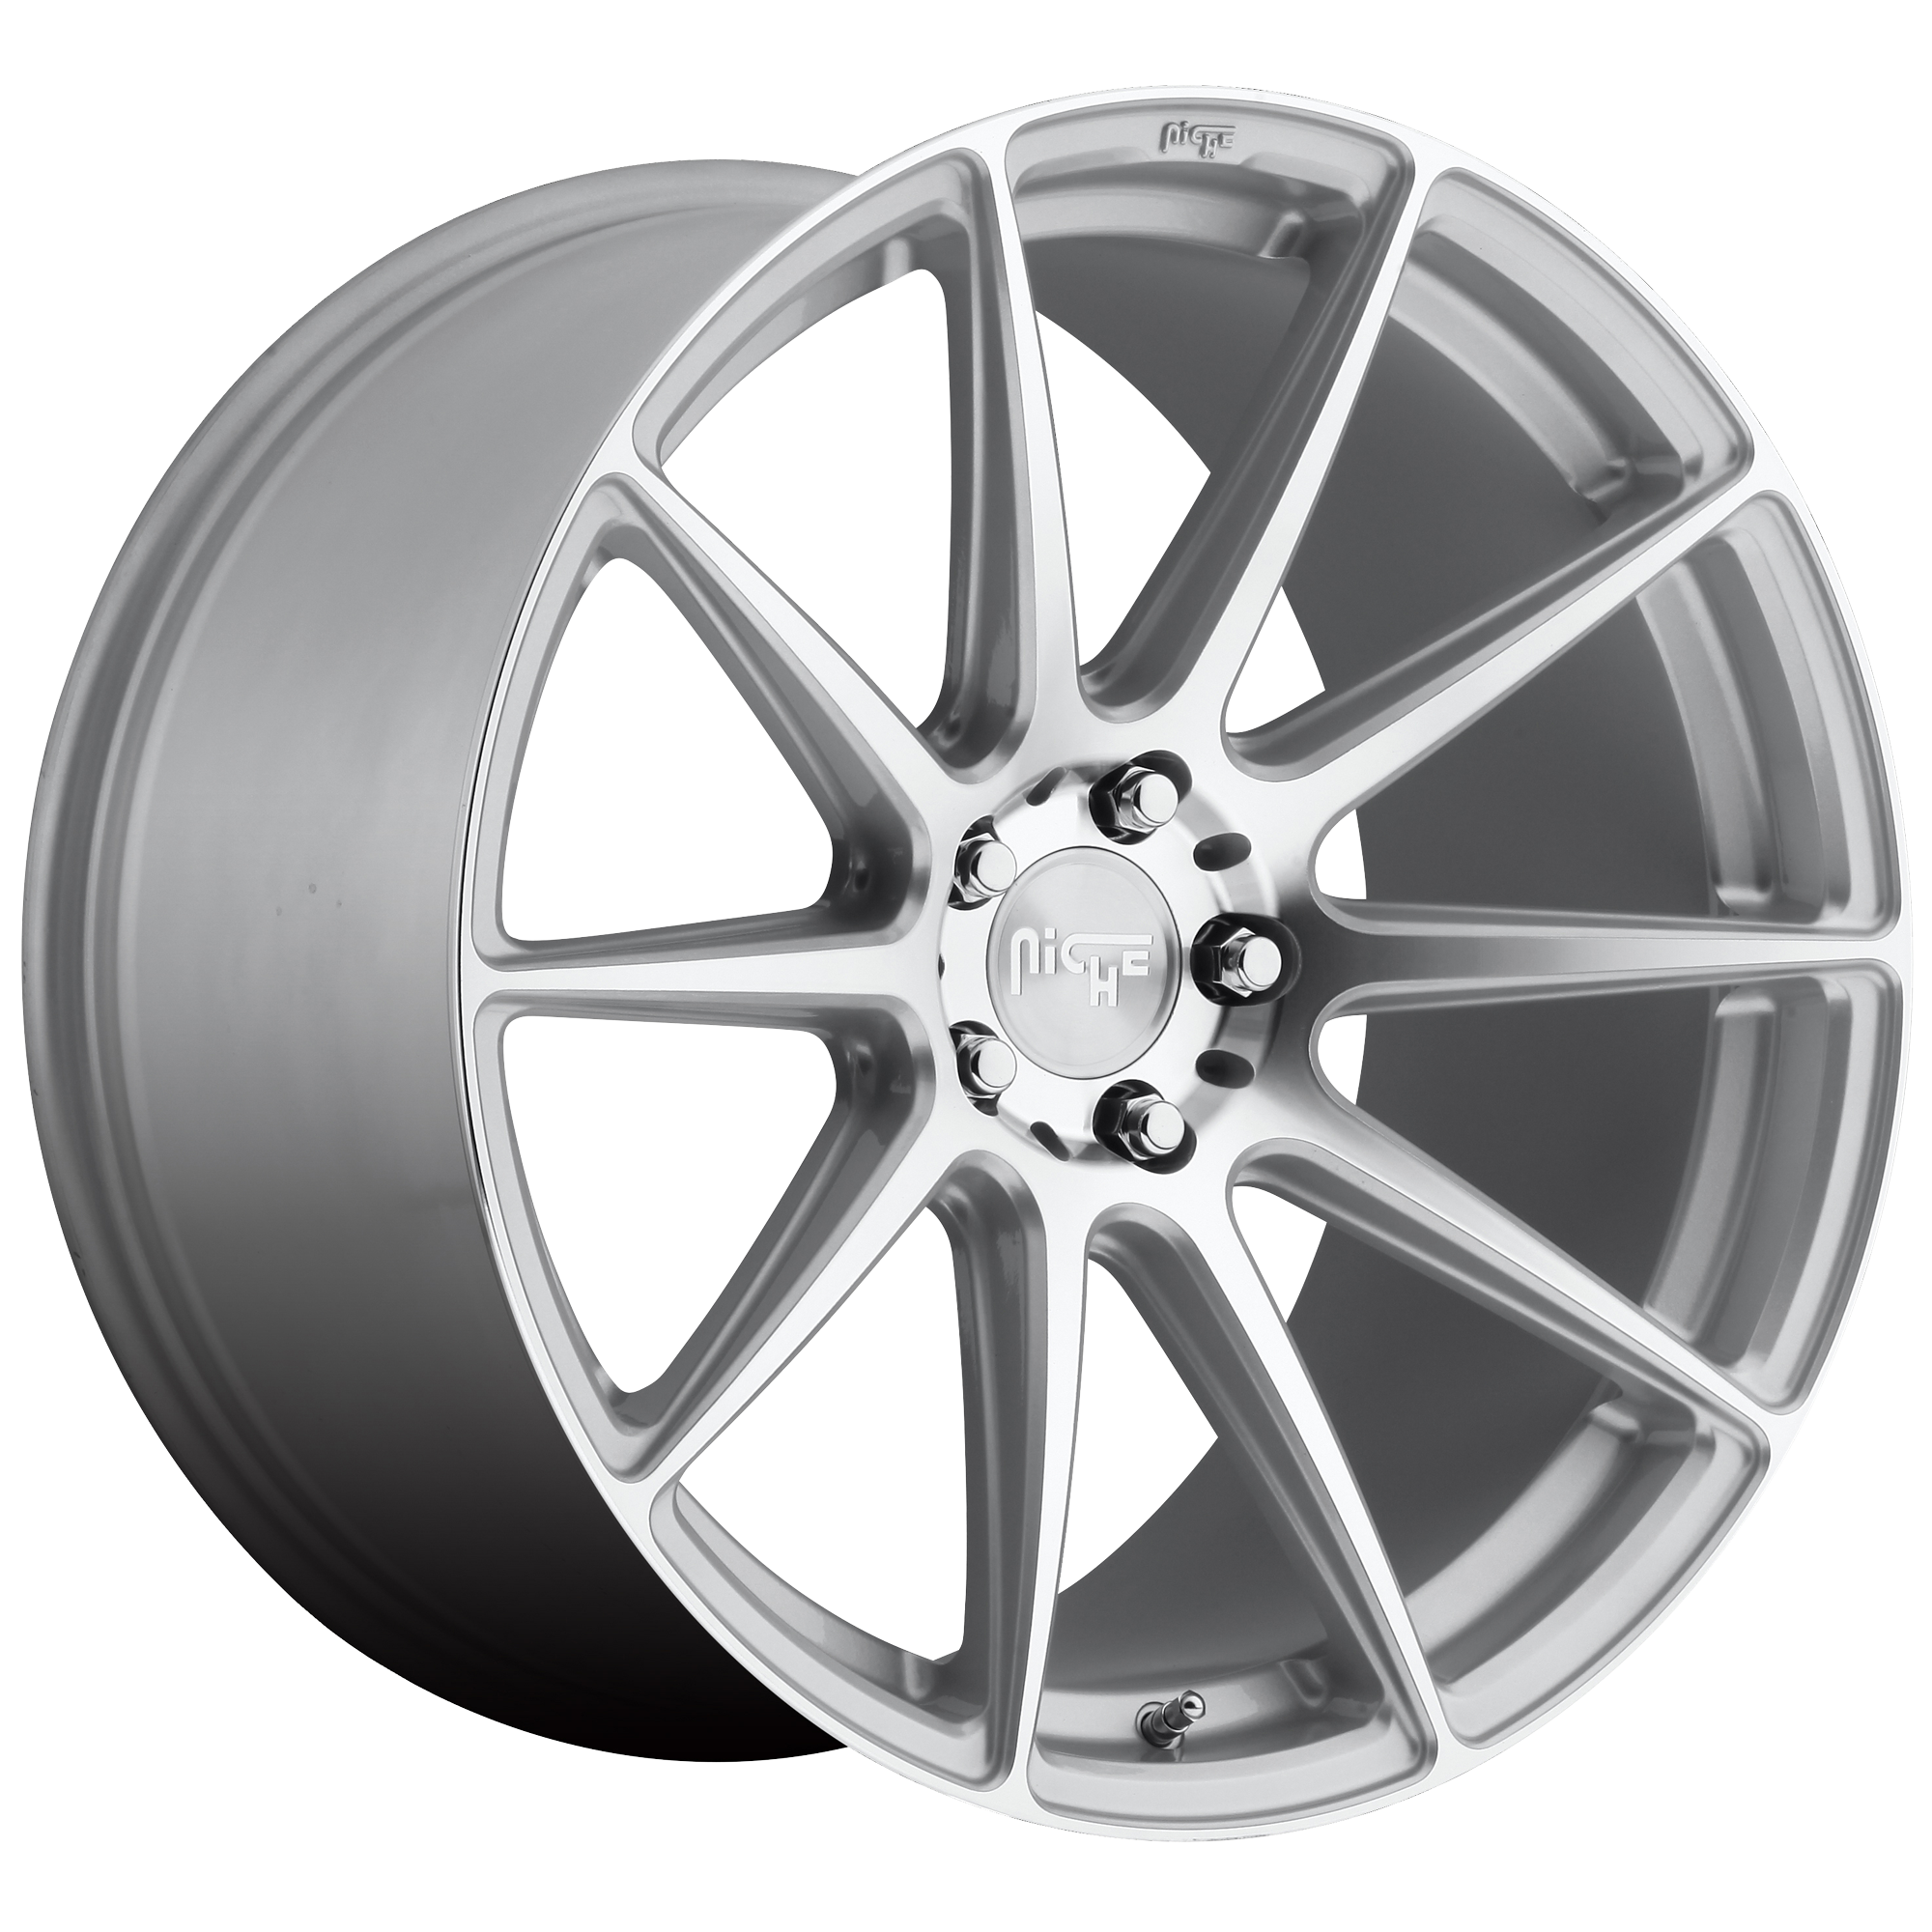 ESSEN 18x8 5x112.00 GLOSS SILVER MACHINED (42 mm) - Tires and Engine Performance